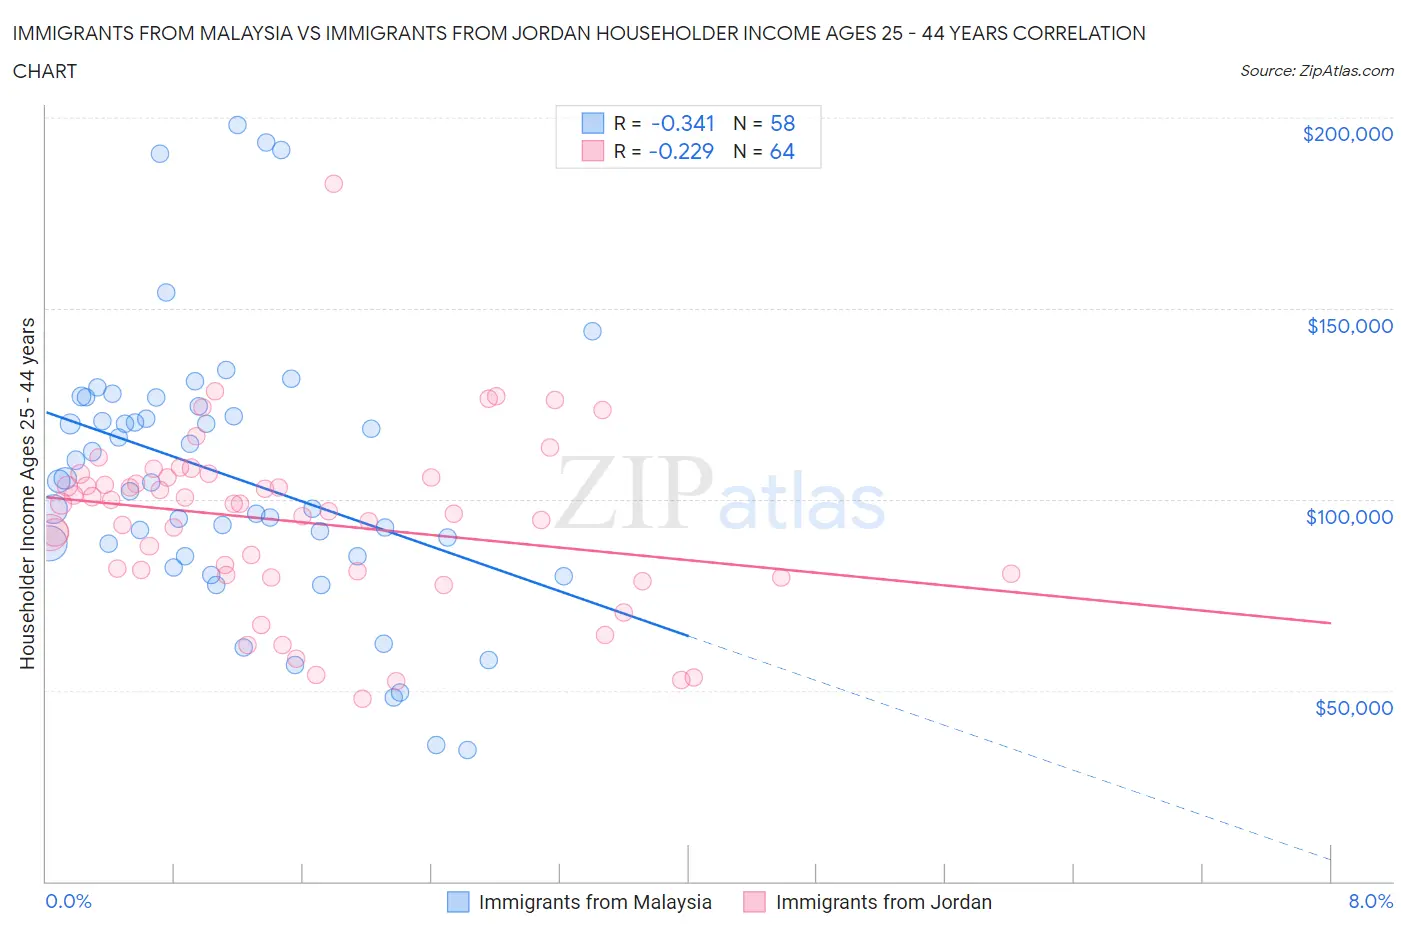 Immigrants from Malaysia vs Immigrants from Jordan Householder Income Ages 25 - 44 years